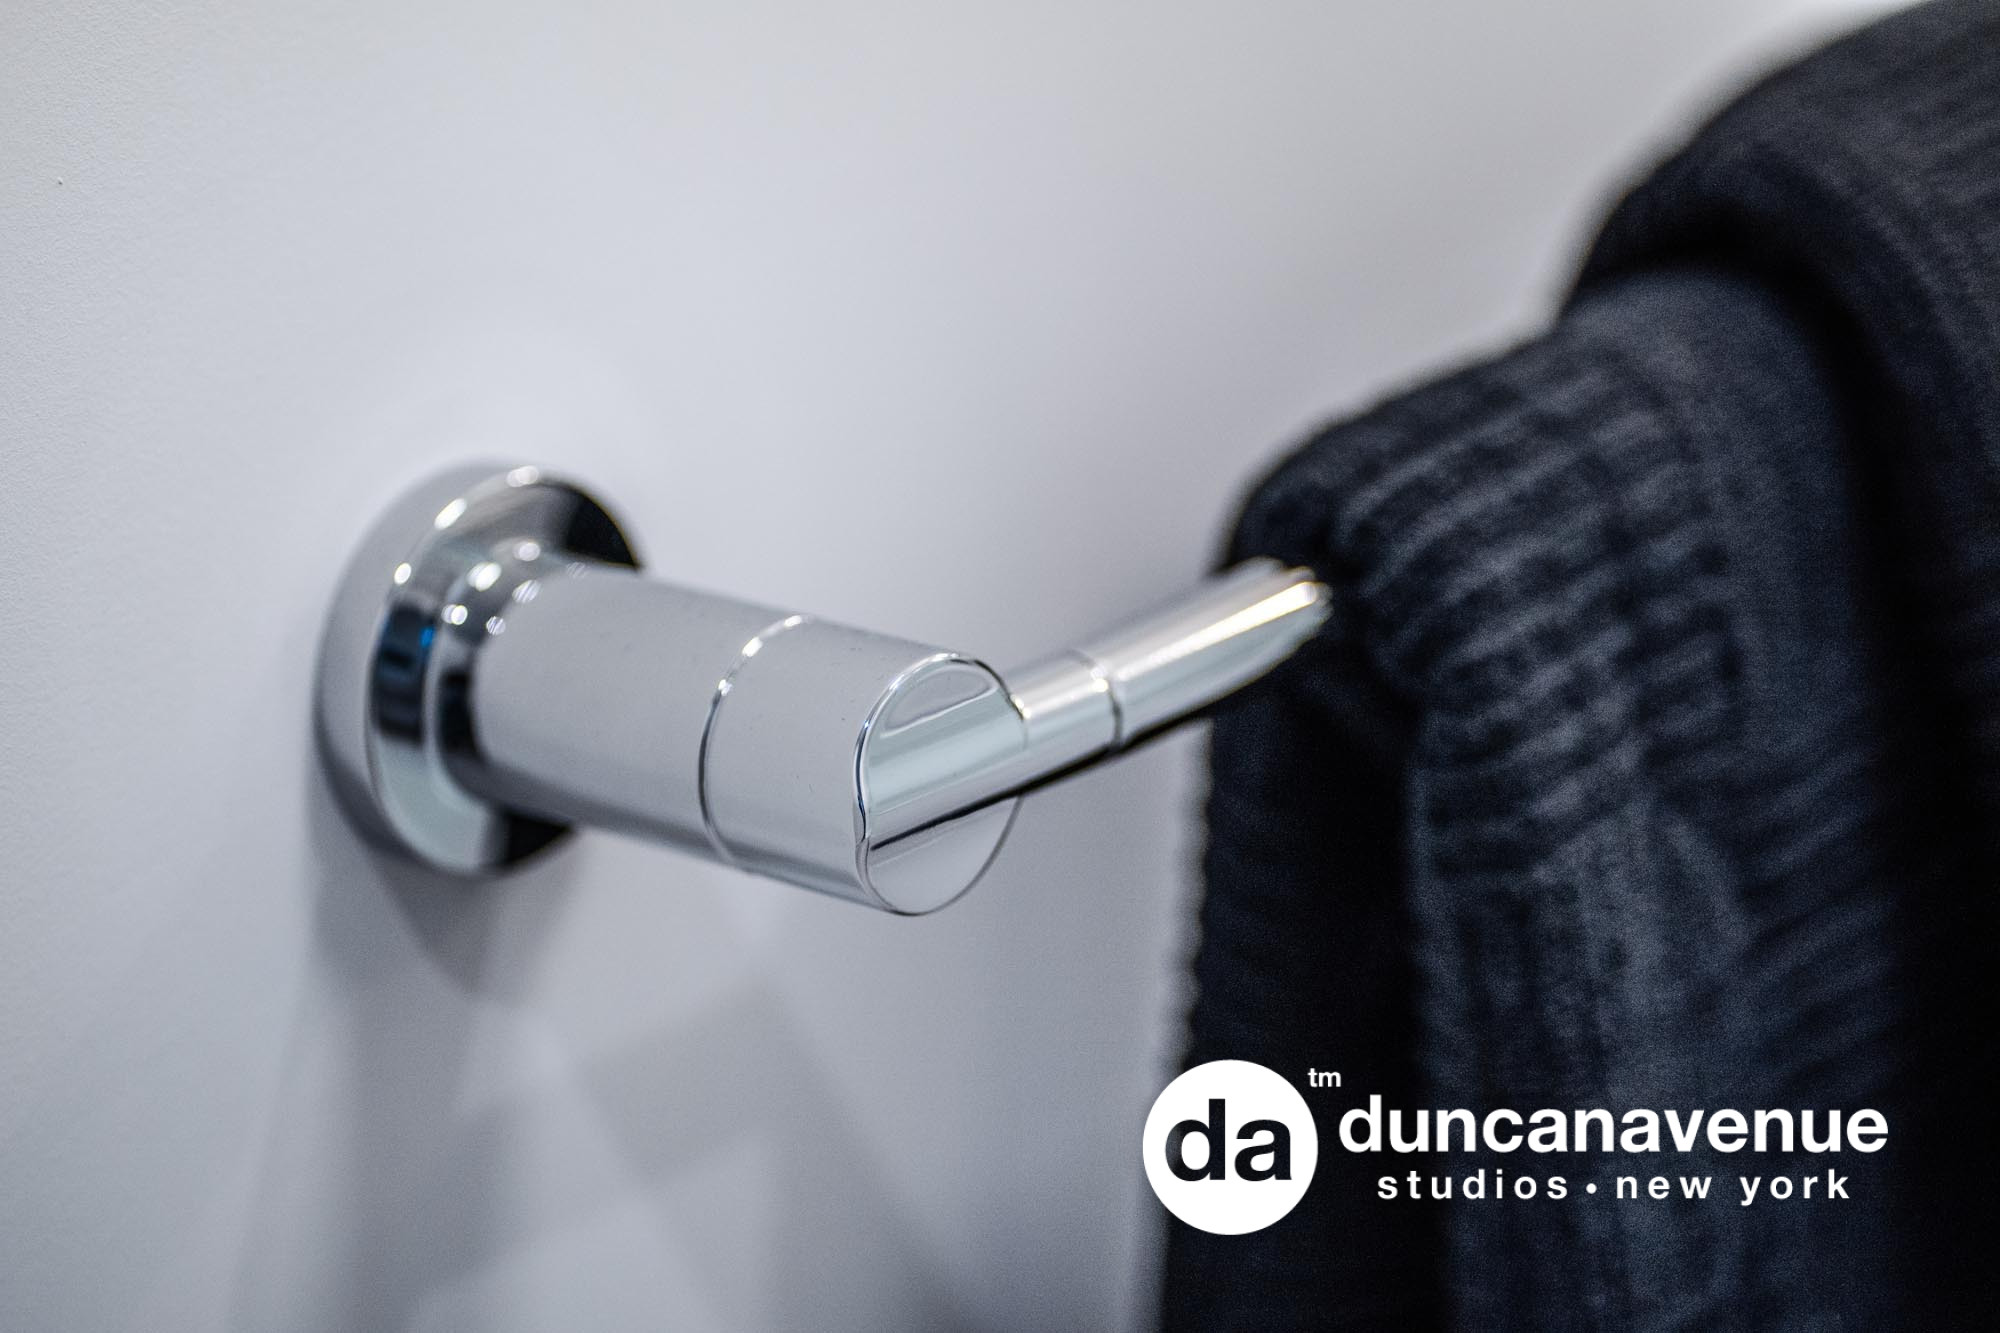 Interior Close-Up Photography: Highlighting the Beauty and Craftsmanship of Your Properties with Duncan Avenue Studios